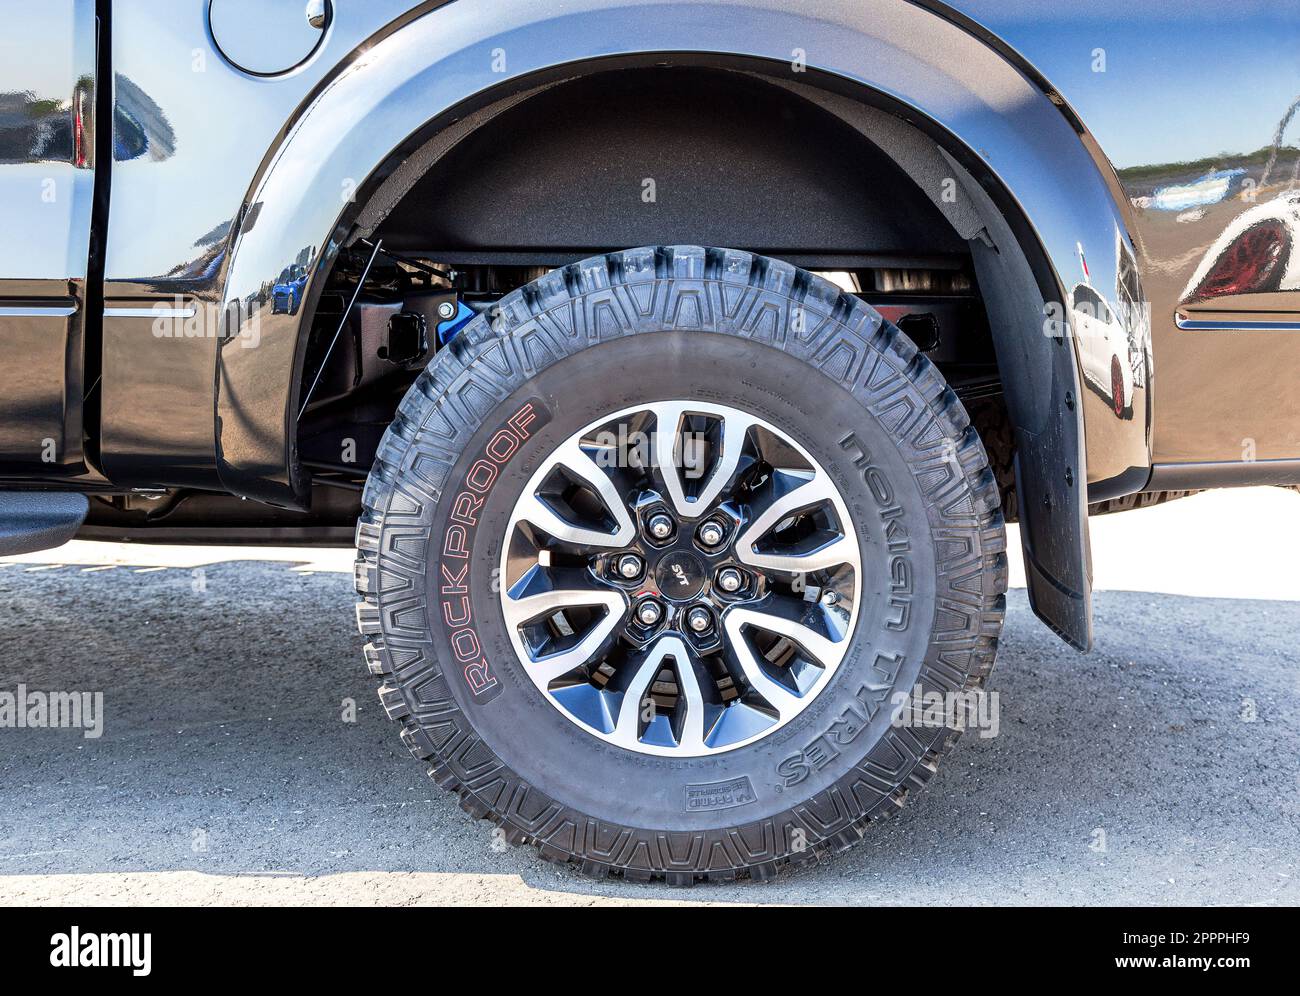 Samara, Russia - June 26, 2022: Wheel all terrain tires Nokian Tyres Rock Proof from off-road Ford F-150 Raptor vehicle Stock Photo